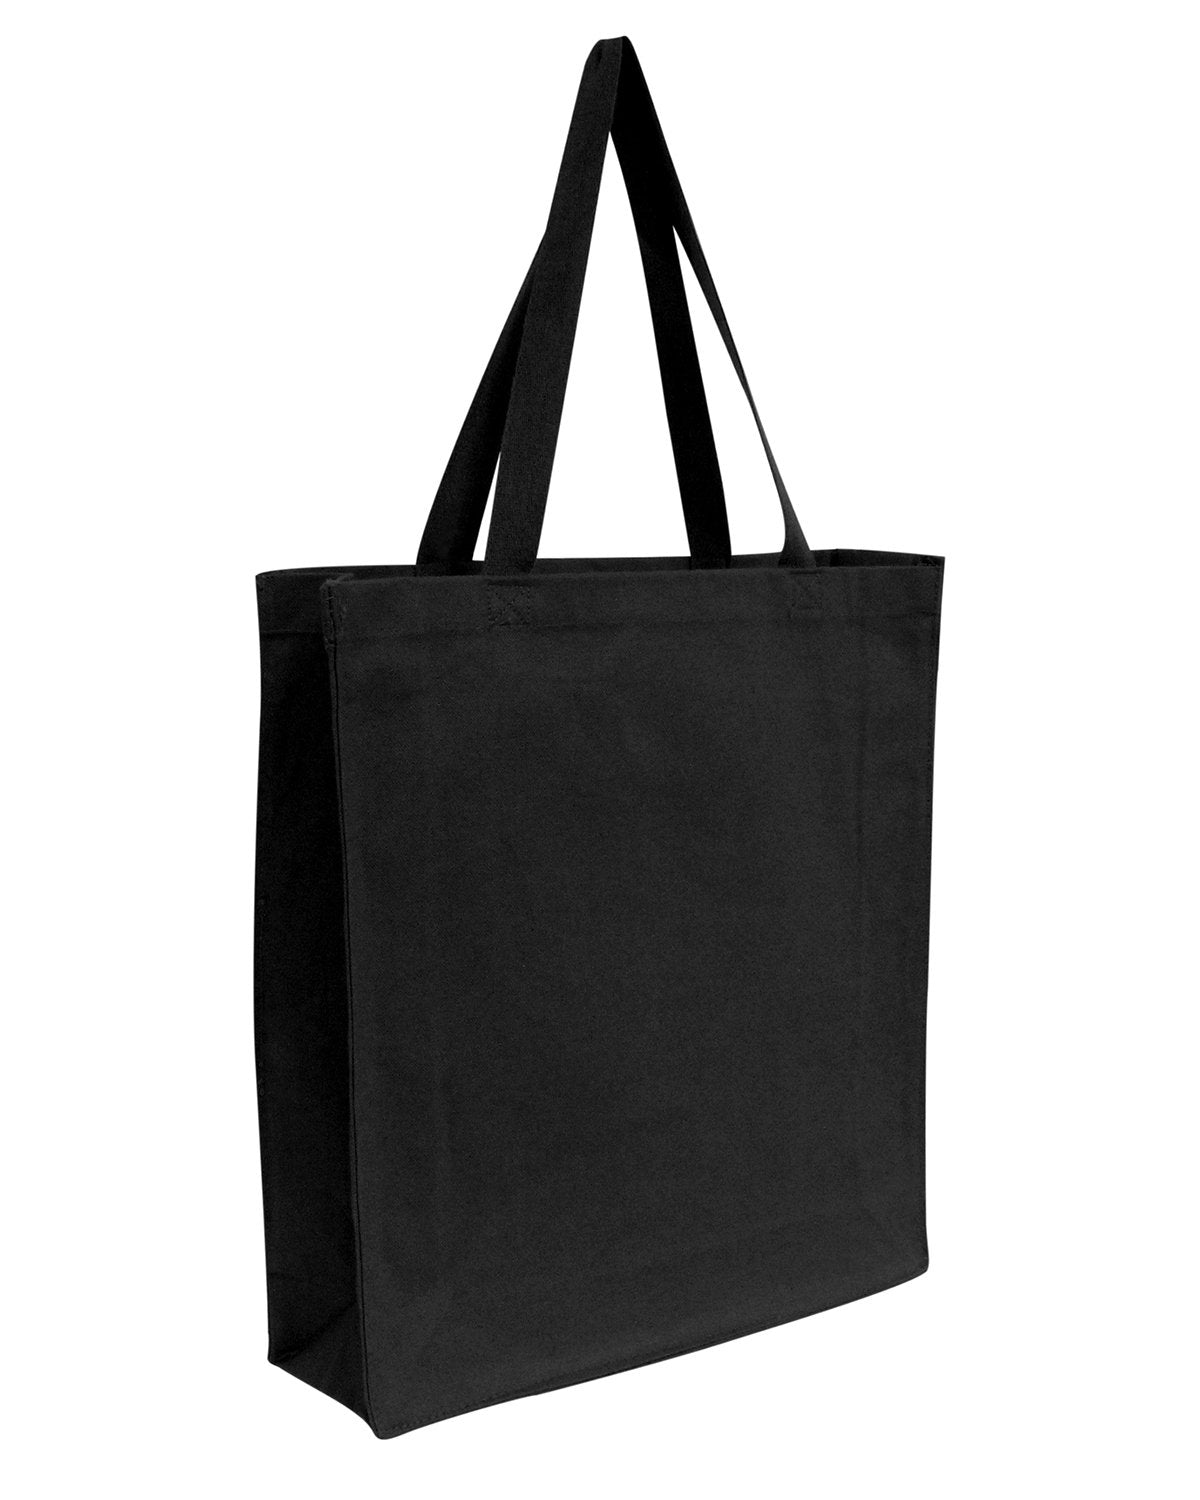 OAD100-OAD-BLACK-OAD-Bags and Accessories-1